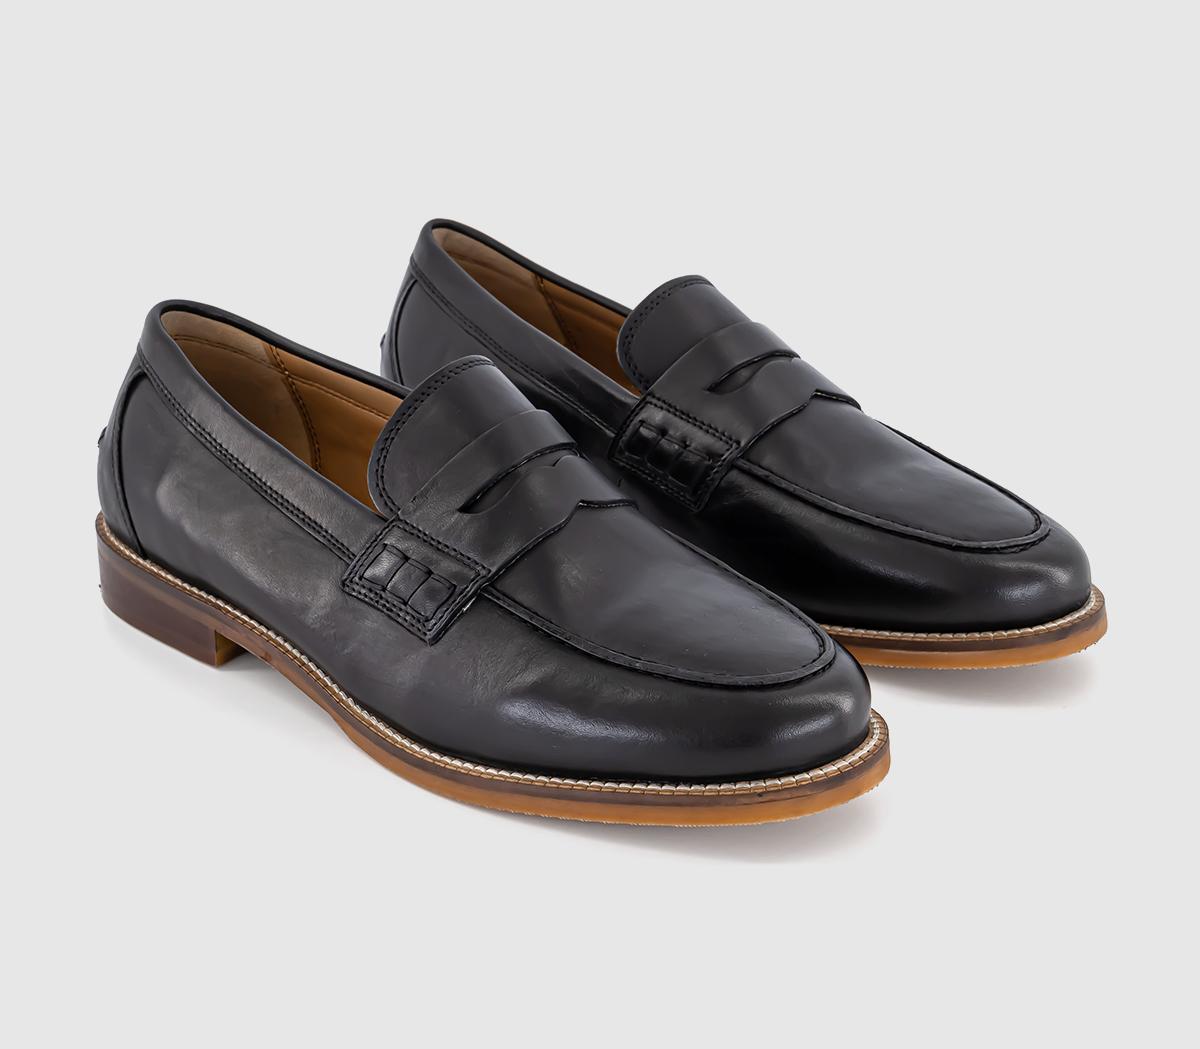 OFFICE Mens Marlborough Penny Loafers Black Leather, 8